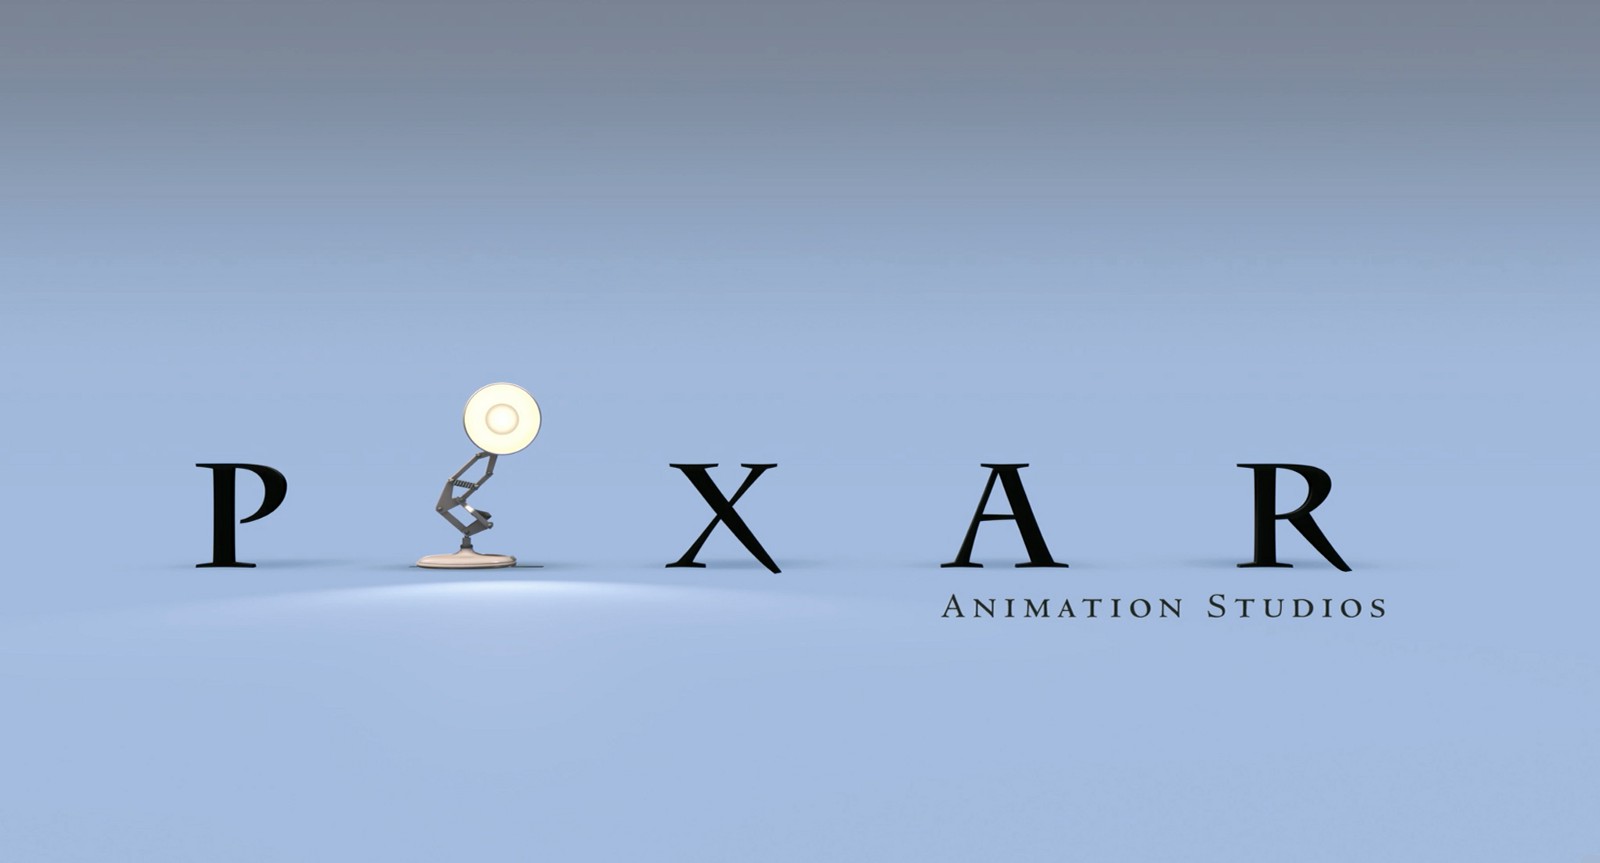 New Original Pixar Film Gets A Title And Release Date Reveal!